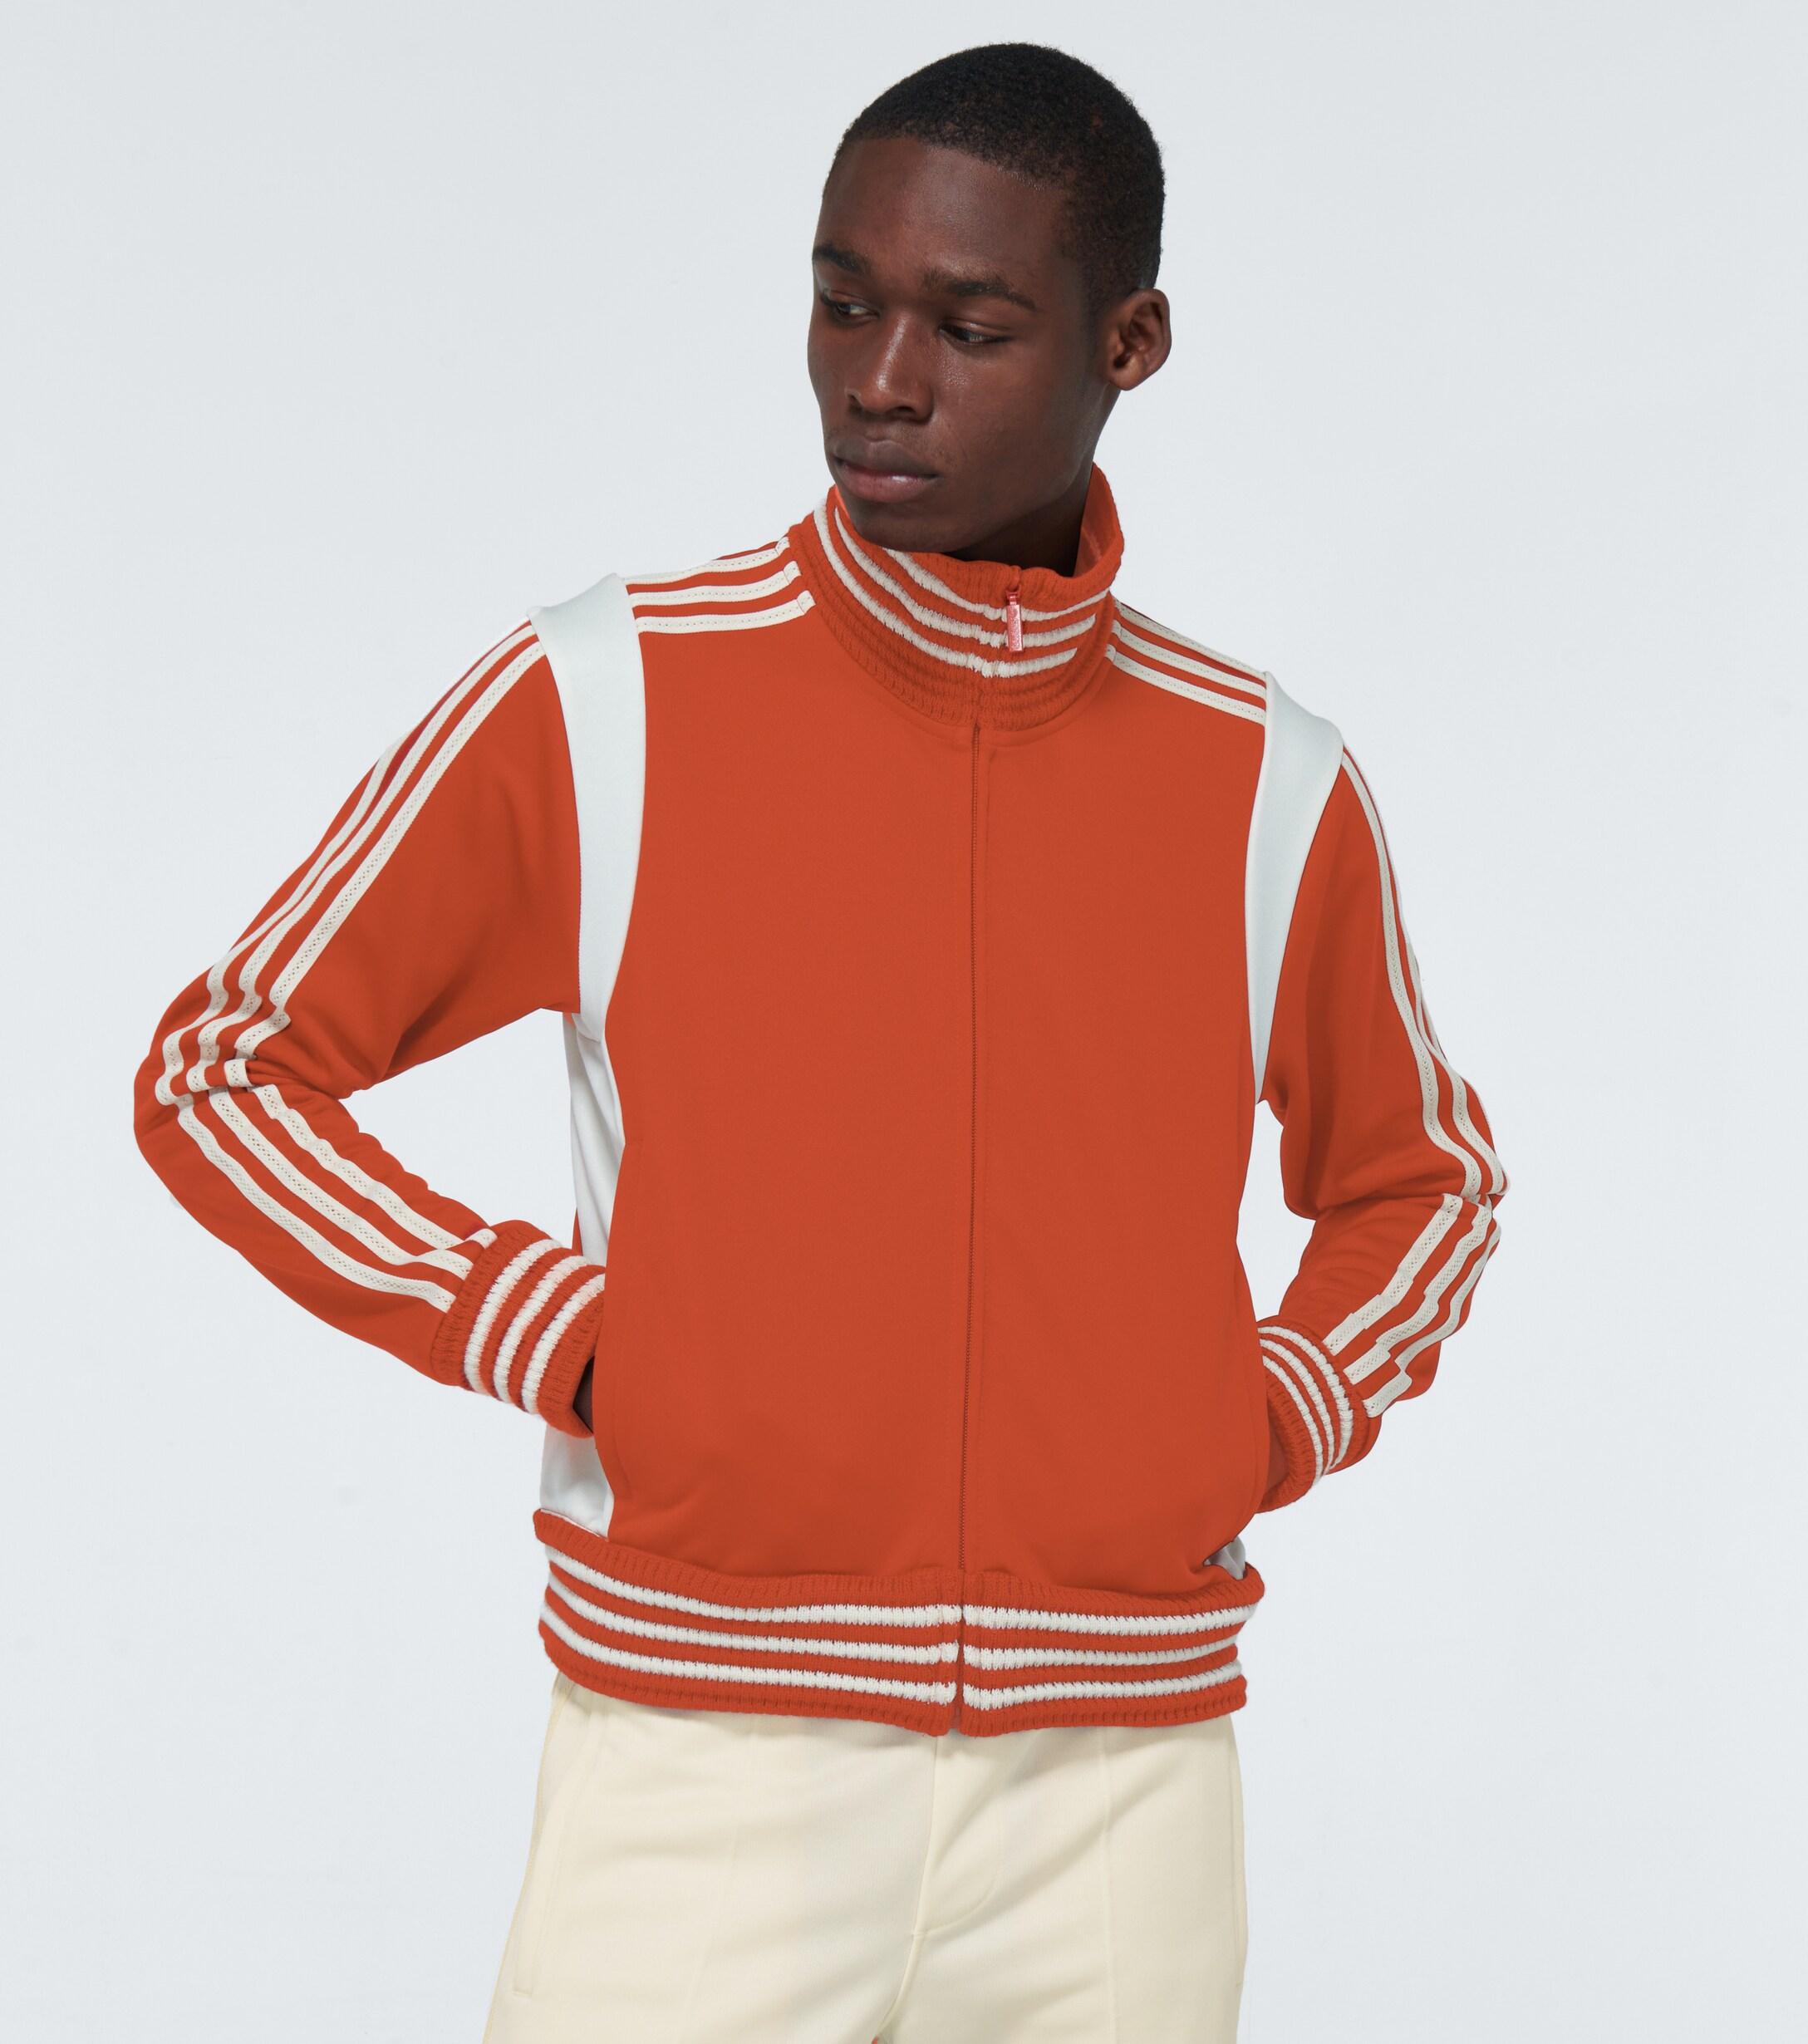 adidas Originals X Wales Bonner Lovers Track Jacket in Red for Men